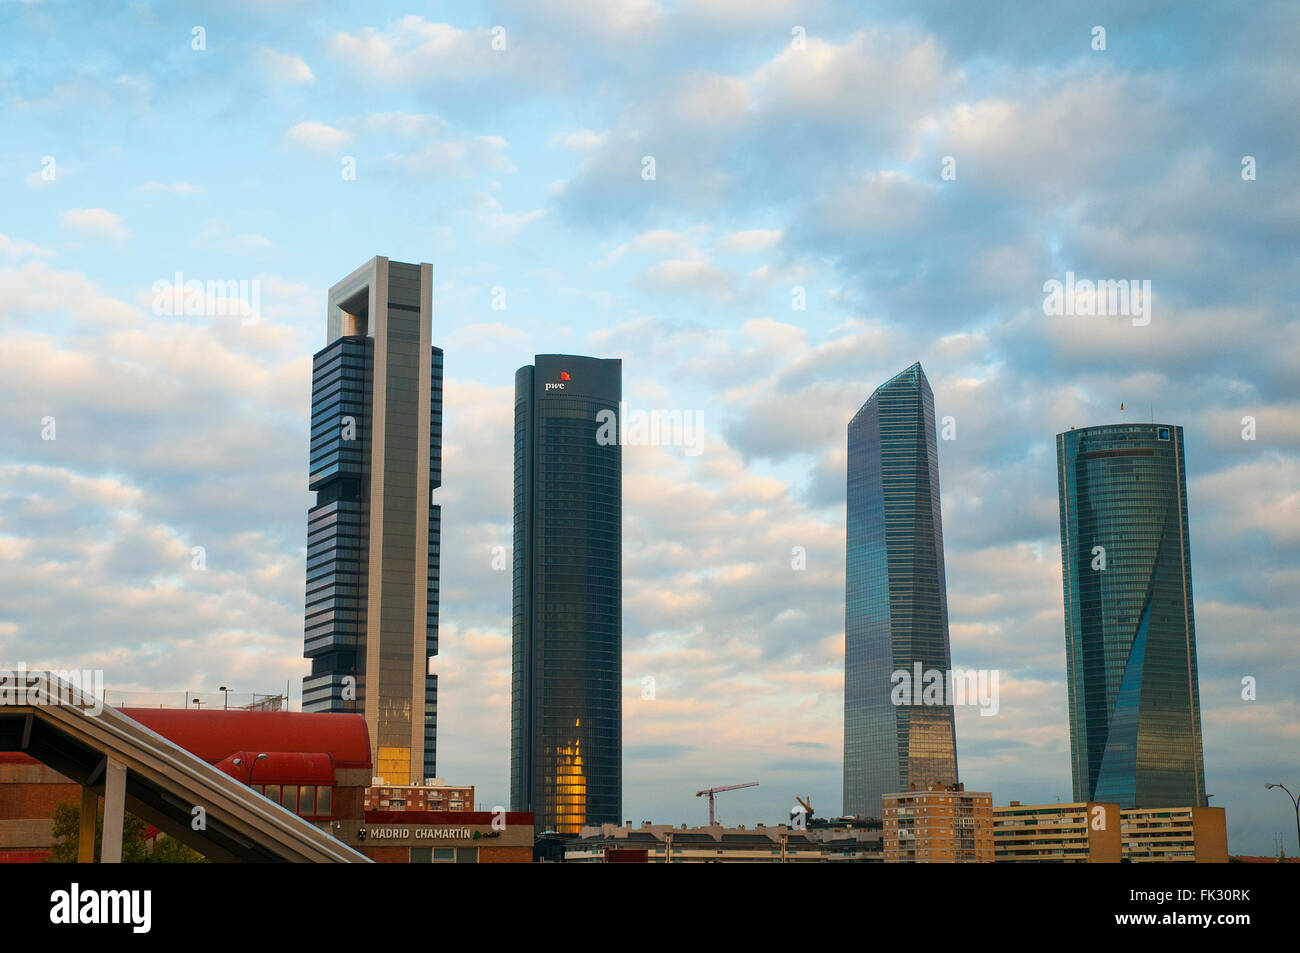 Four Towers from Chamartin Railway Station at dawn. Madrid, Spain. Stock Photo